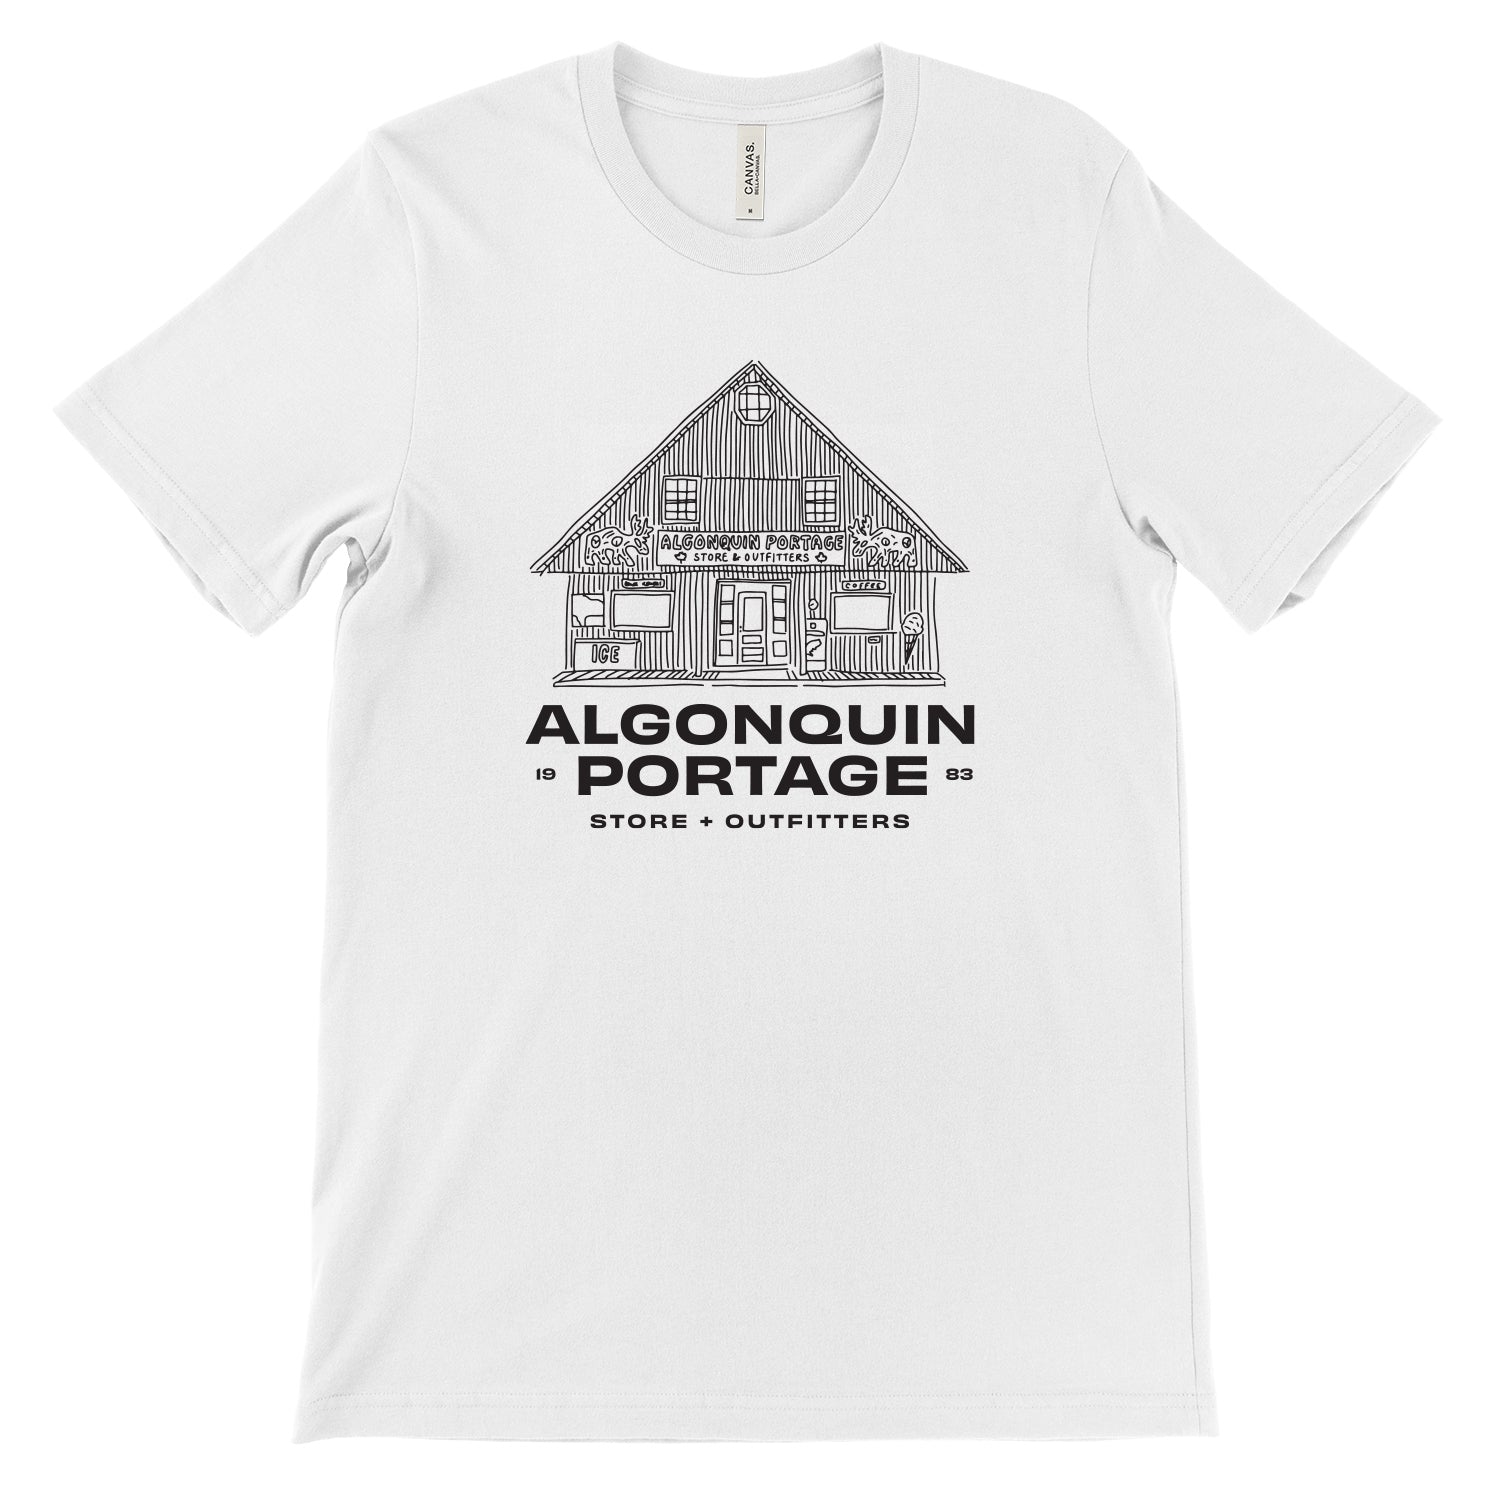 Algonquin portage store and outifitters white t-shirt with black graphic